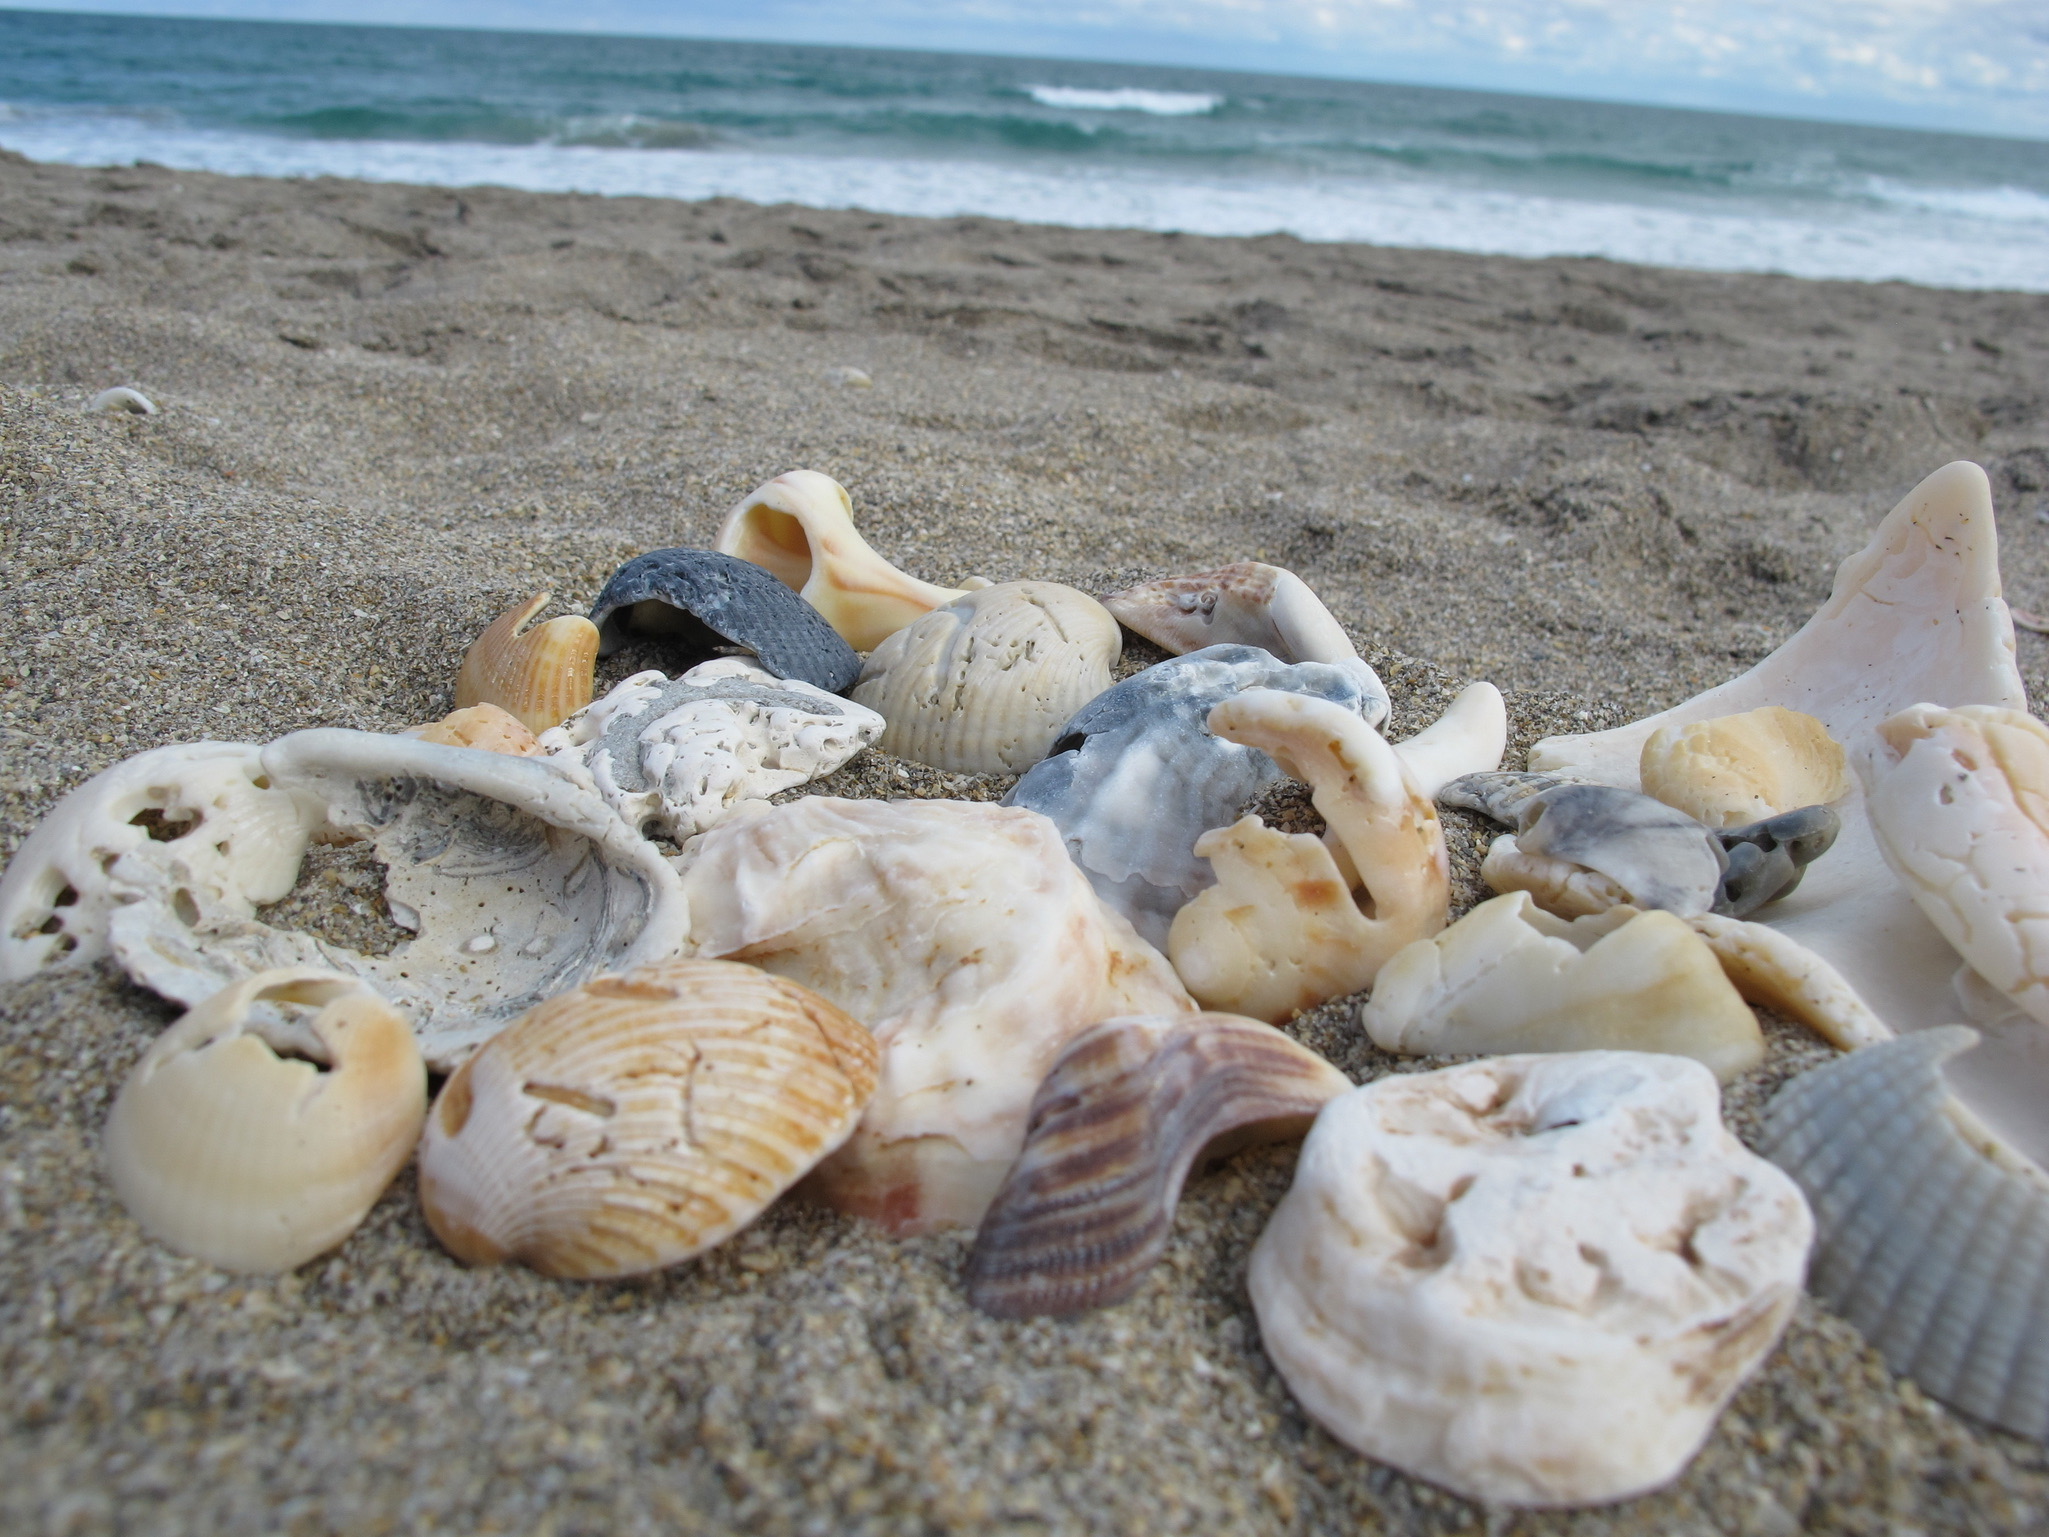 Shells on Beach for No Ugly Shells post